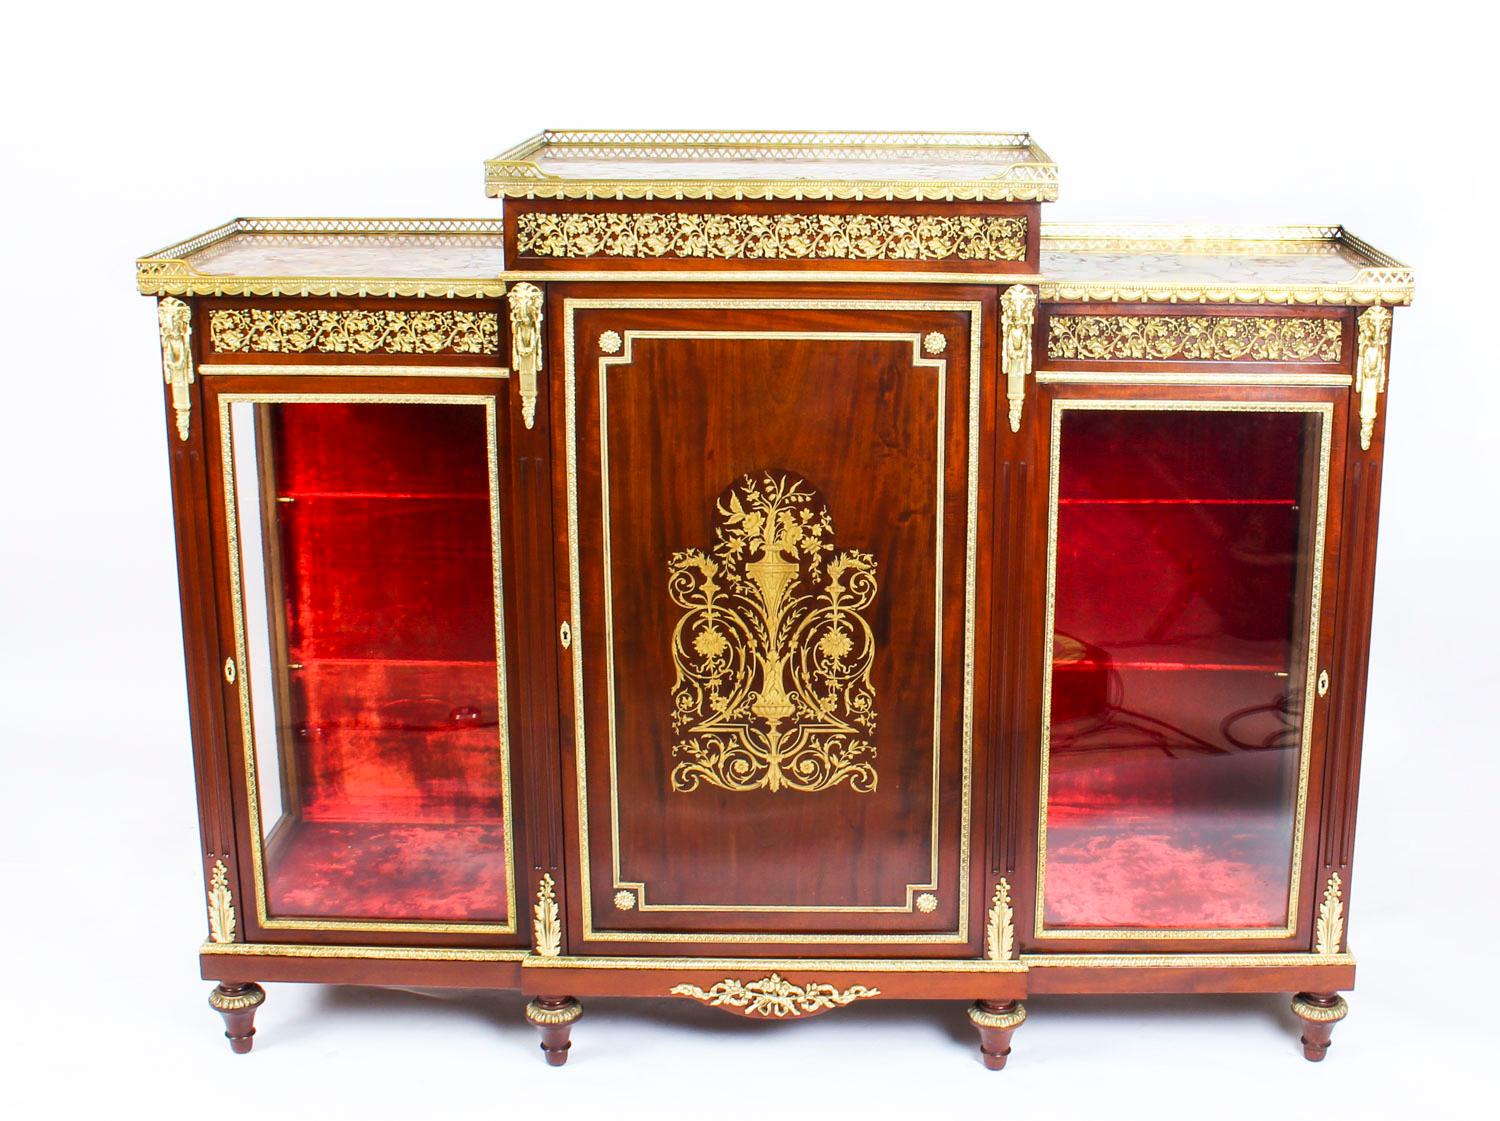 This is an absolutely stunning exhibition quality antique Napoleon III, flame mahogany and cut brass inlaid Boulle breakfront credenza, circa 1860 in date.

This striking credenza is profusely decorated with fabulous ormolu mounts and a striking